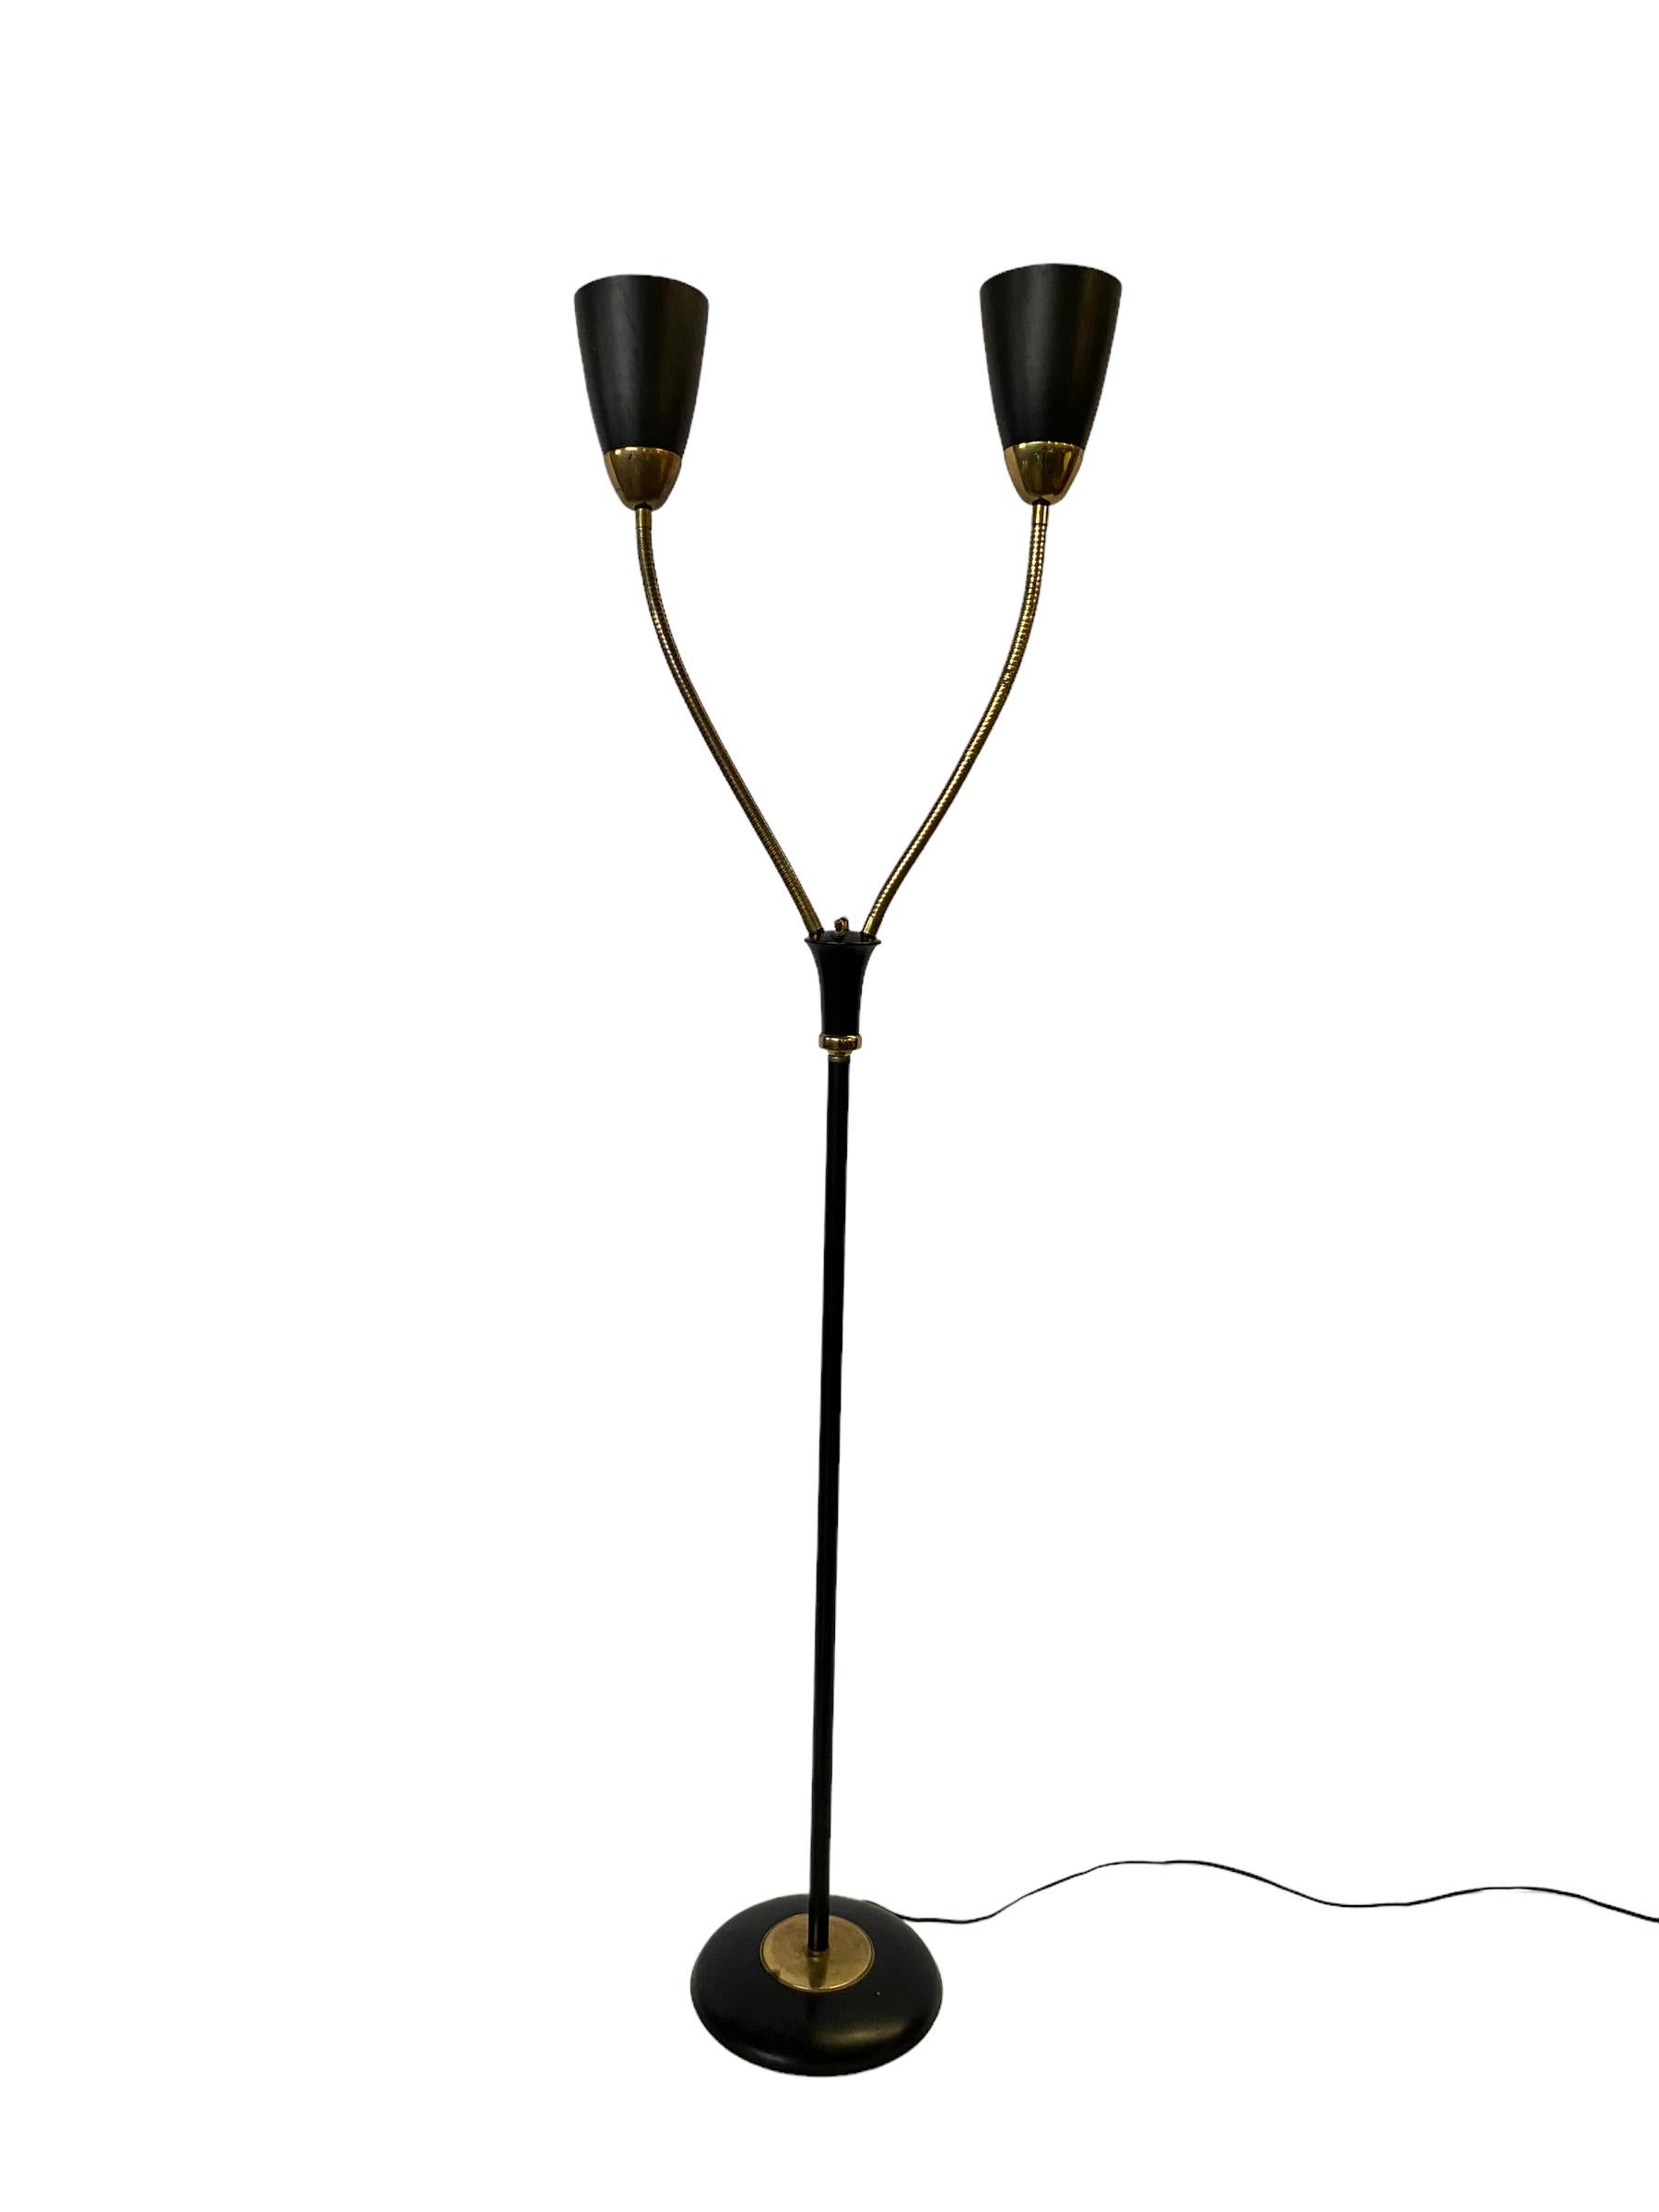 Double Gooseneck floor lamp in the style of Gerald Thurston. The lamp features black-enameled brass, gooseneck stems, and is in good vintage condition. Three-way switch on stem allows for one, the other, or both heads to illuminate. Gooseneck arms